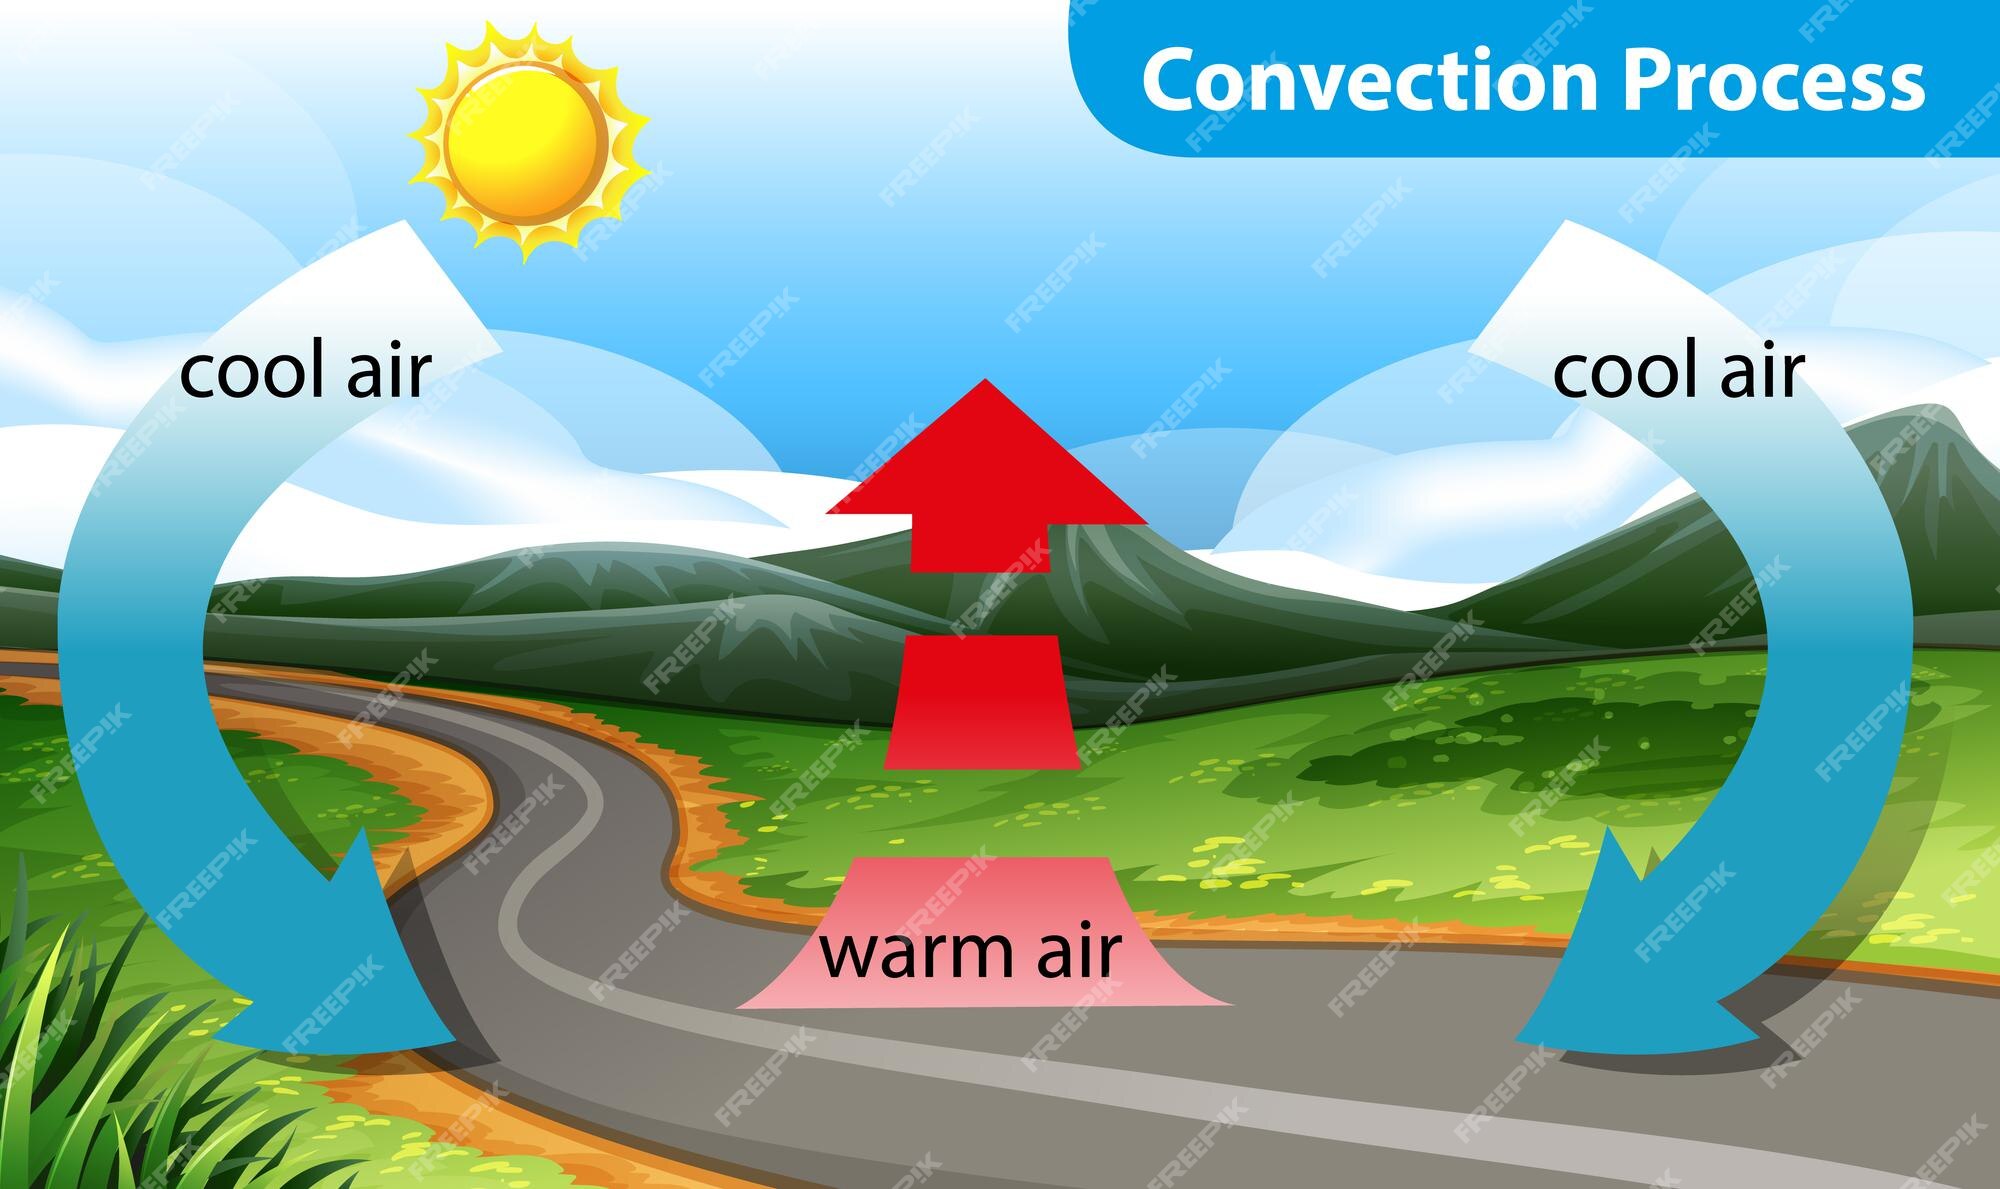 Free Vector Diagram showing convection process